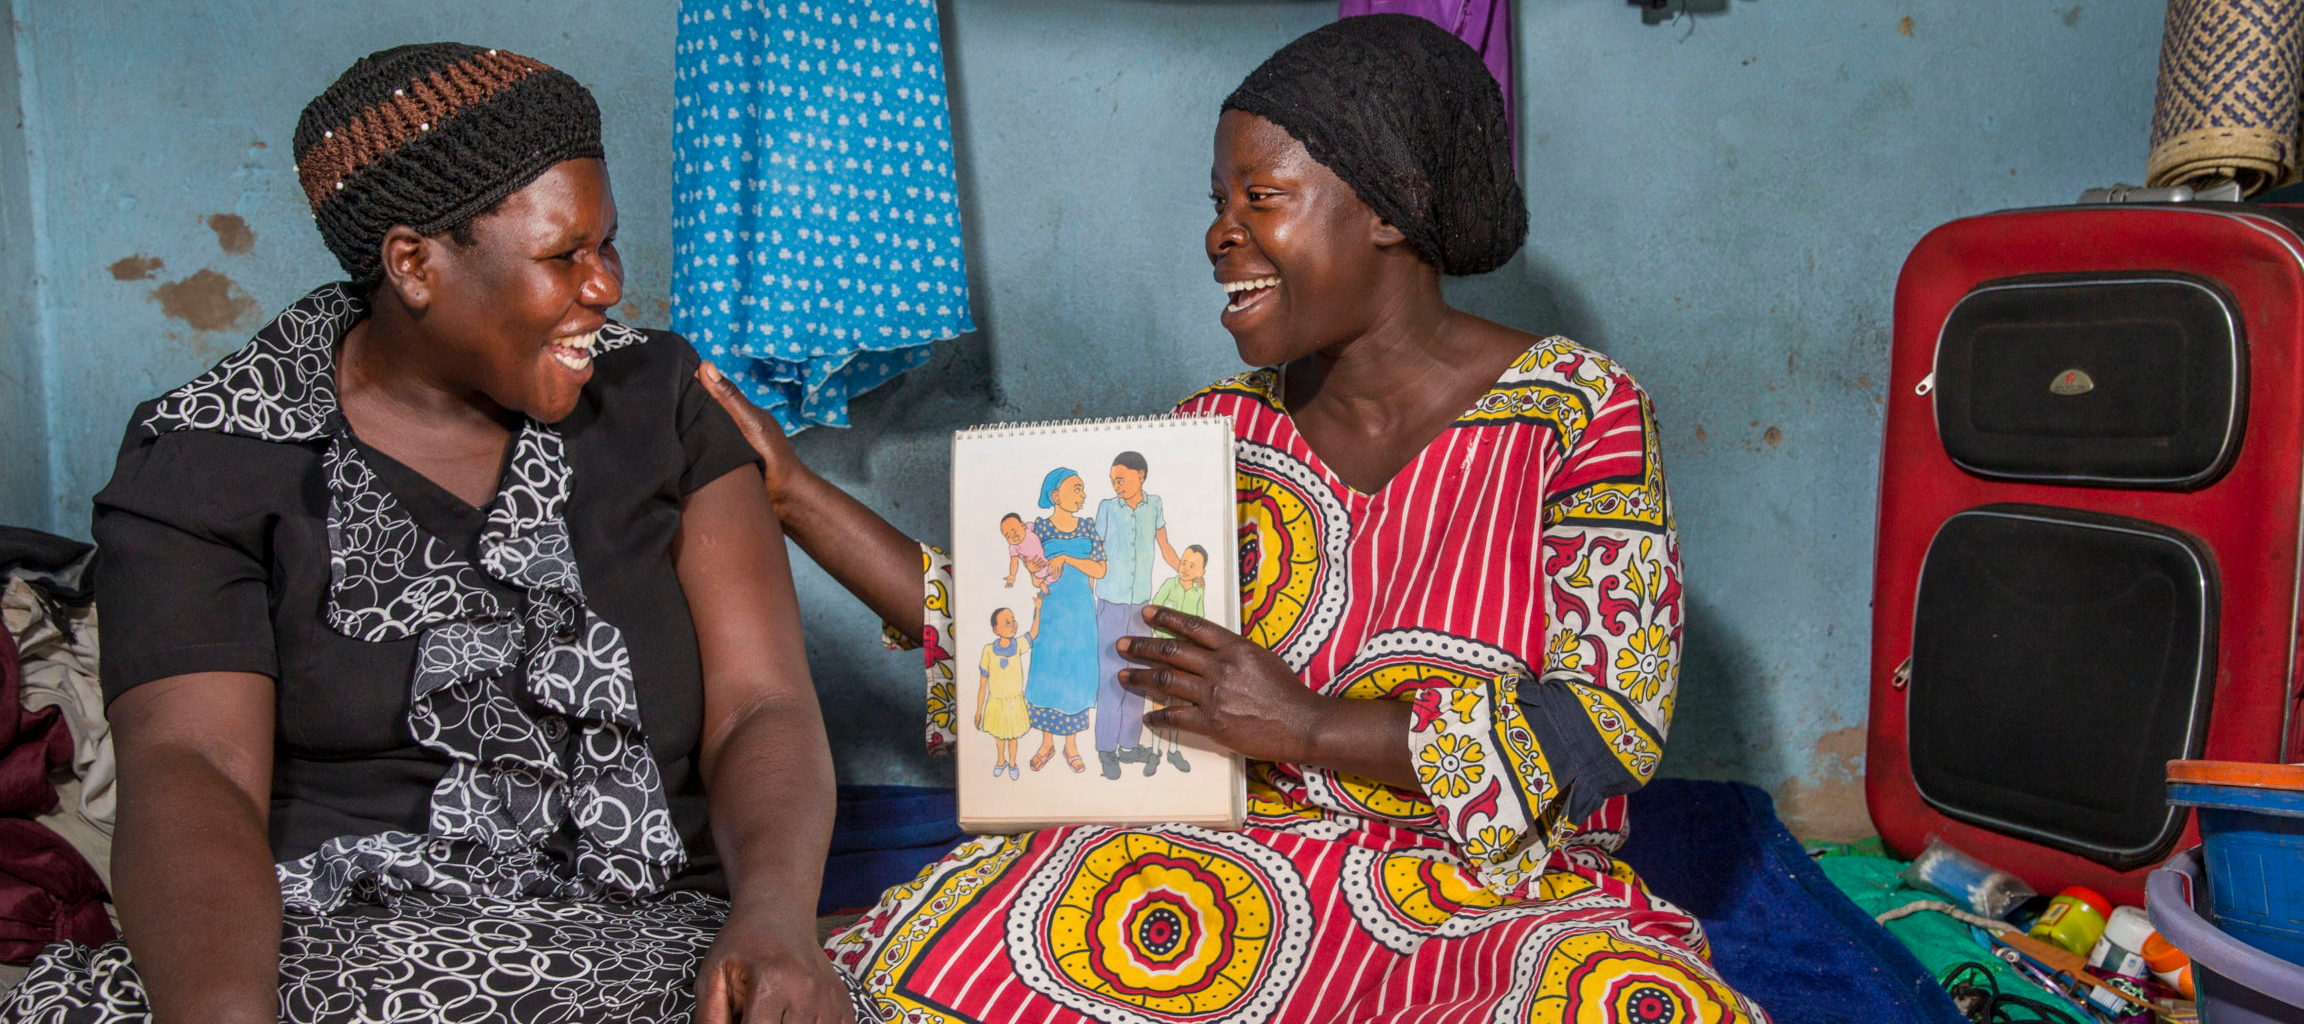 Community health worker during a home visit, providing family planning services and options to women in the community. This proactive program is supported by Reproductive Health Uganda.